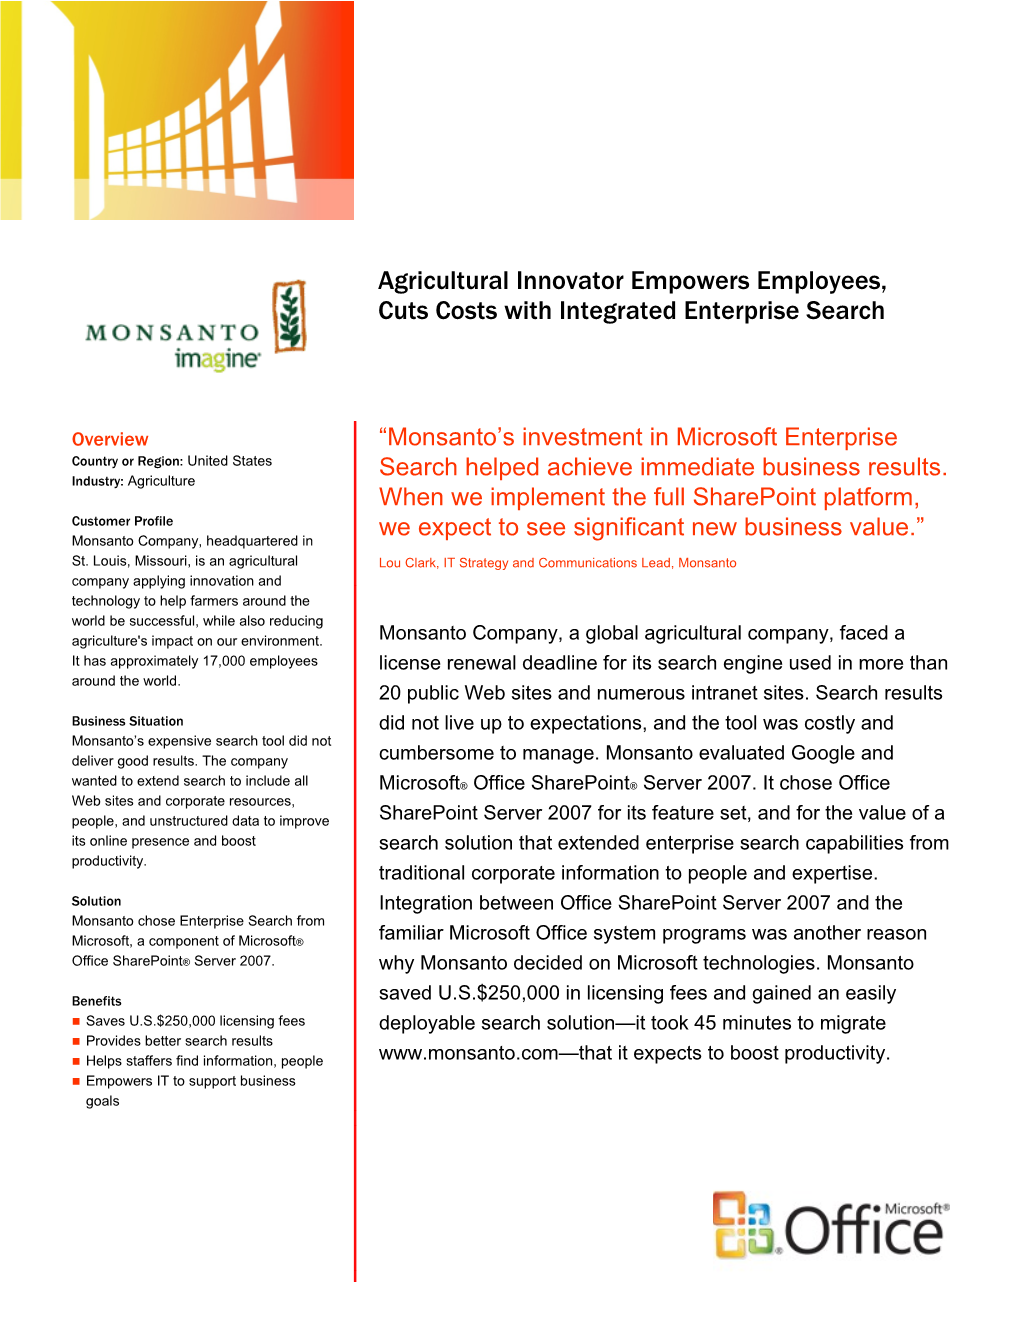 Agricultural Innovator Empowers Employees, Cuts Costs with Integrated Enterprise Search